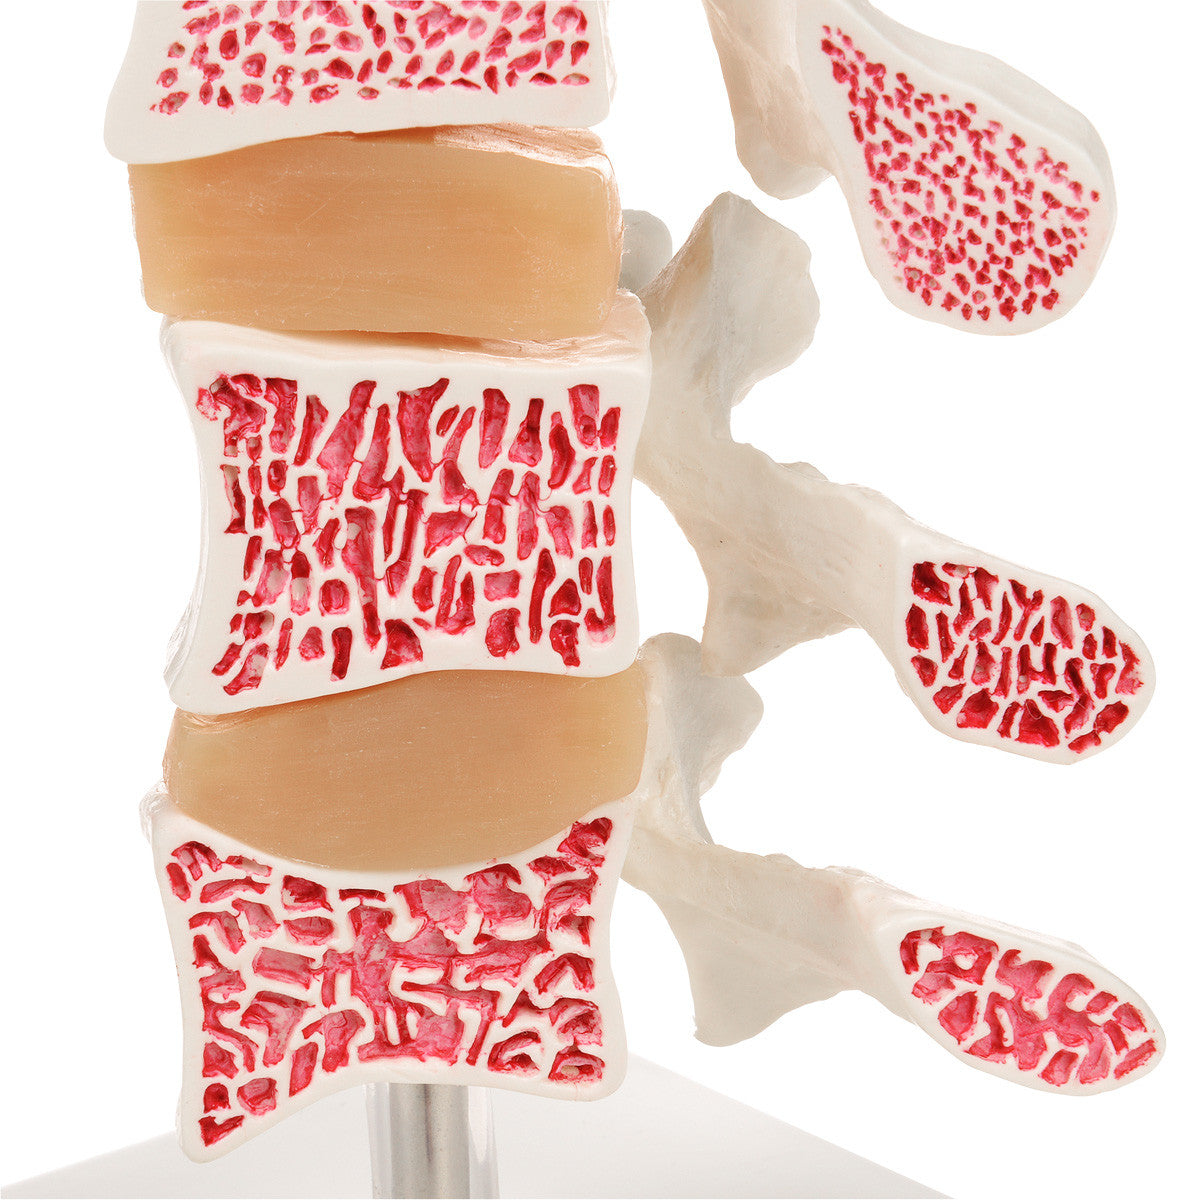 Deluxe Osteoporosis Model - detail